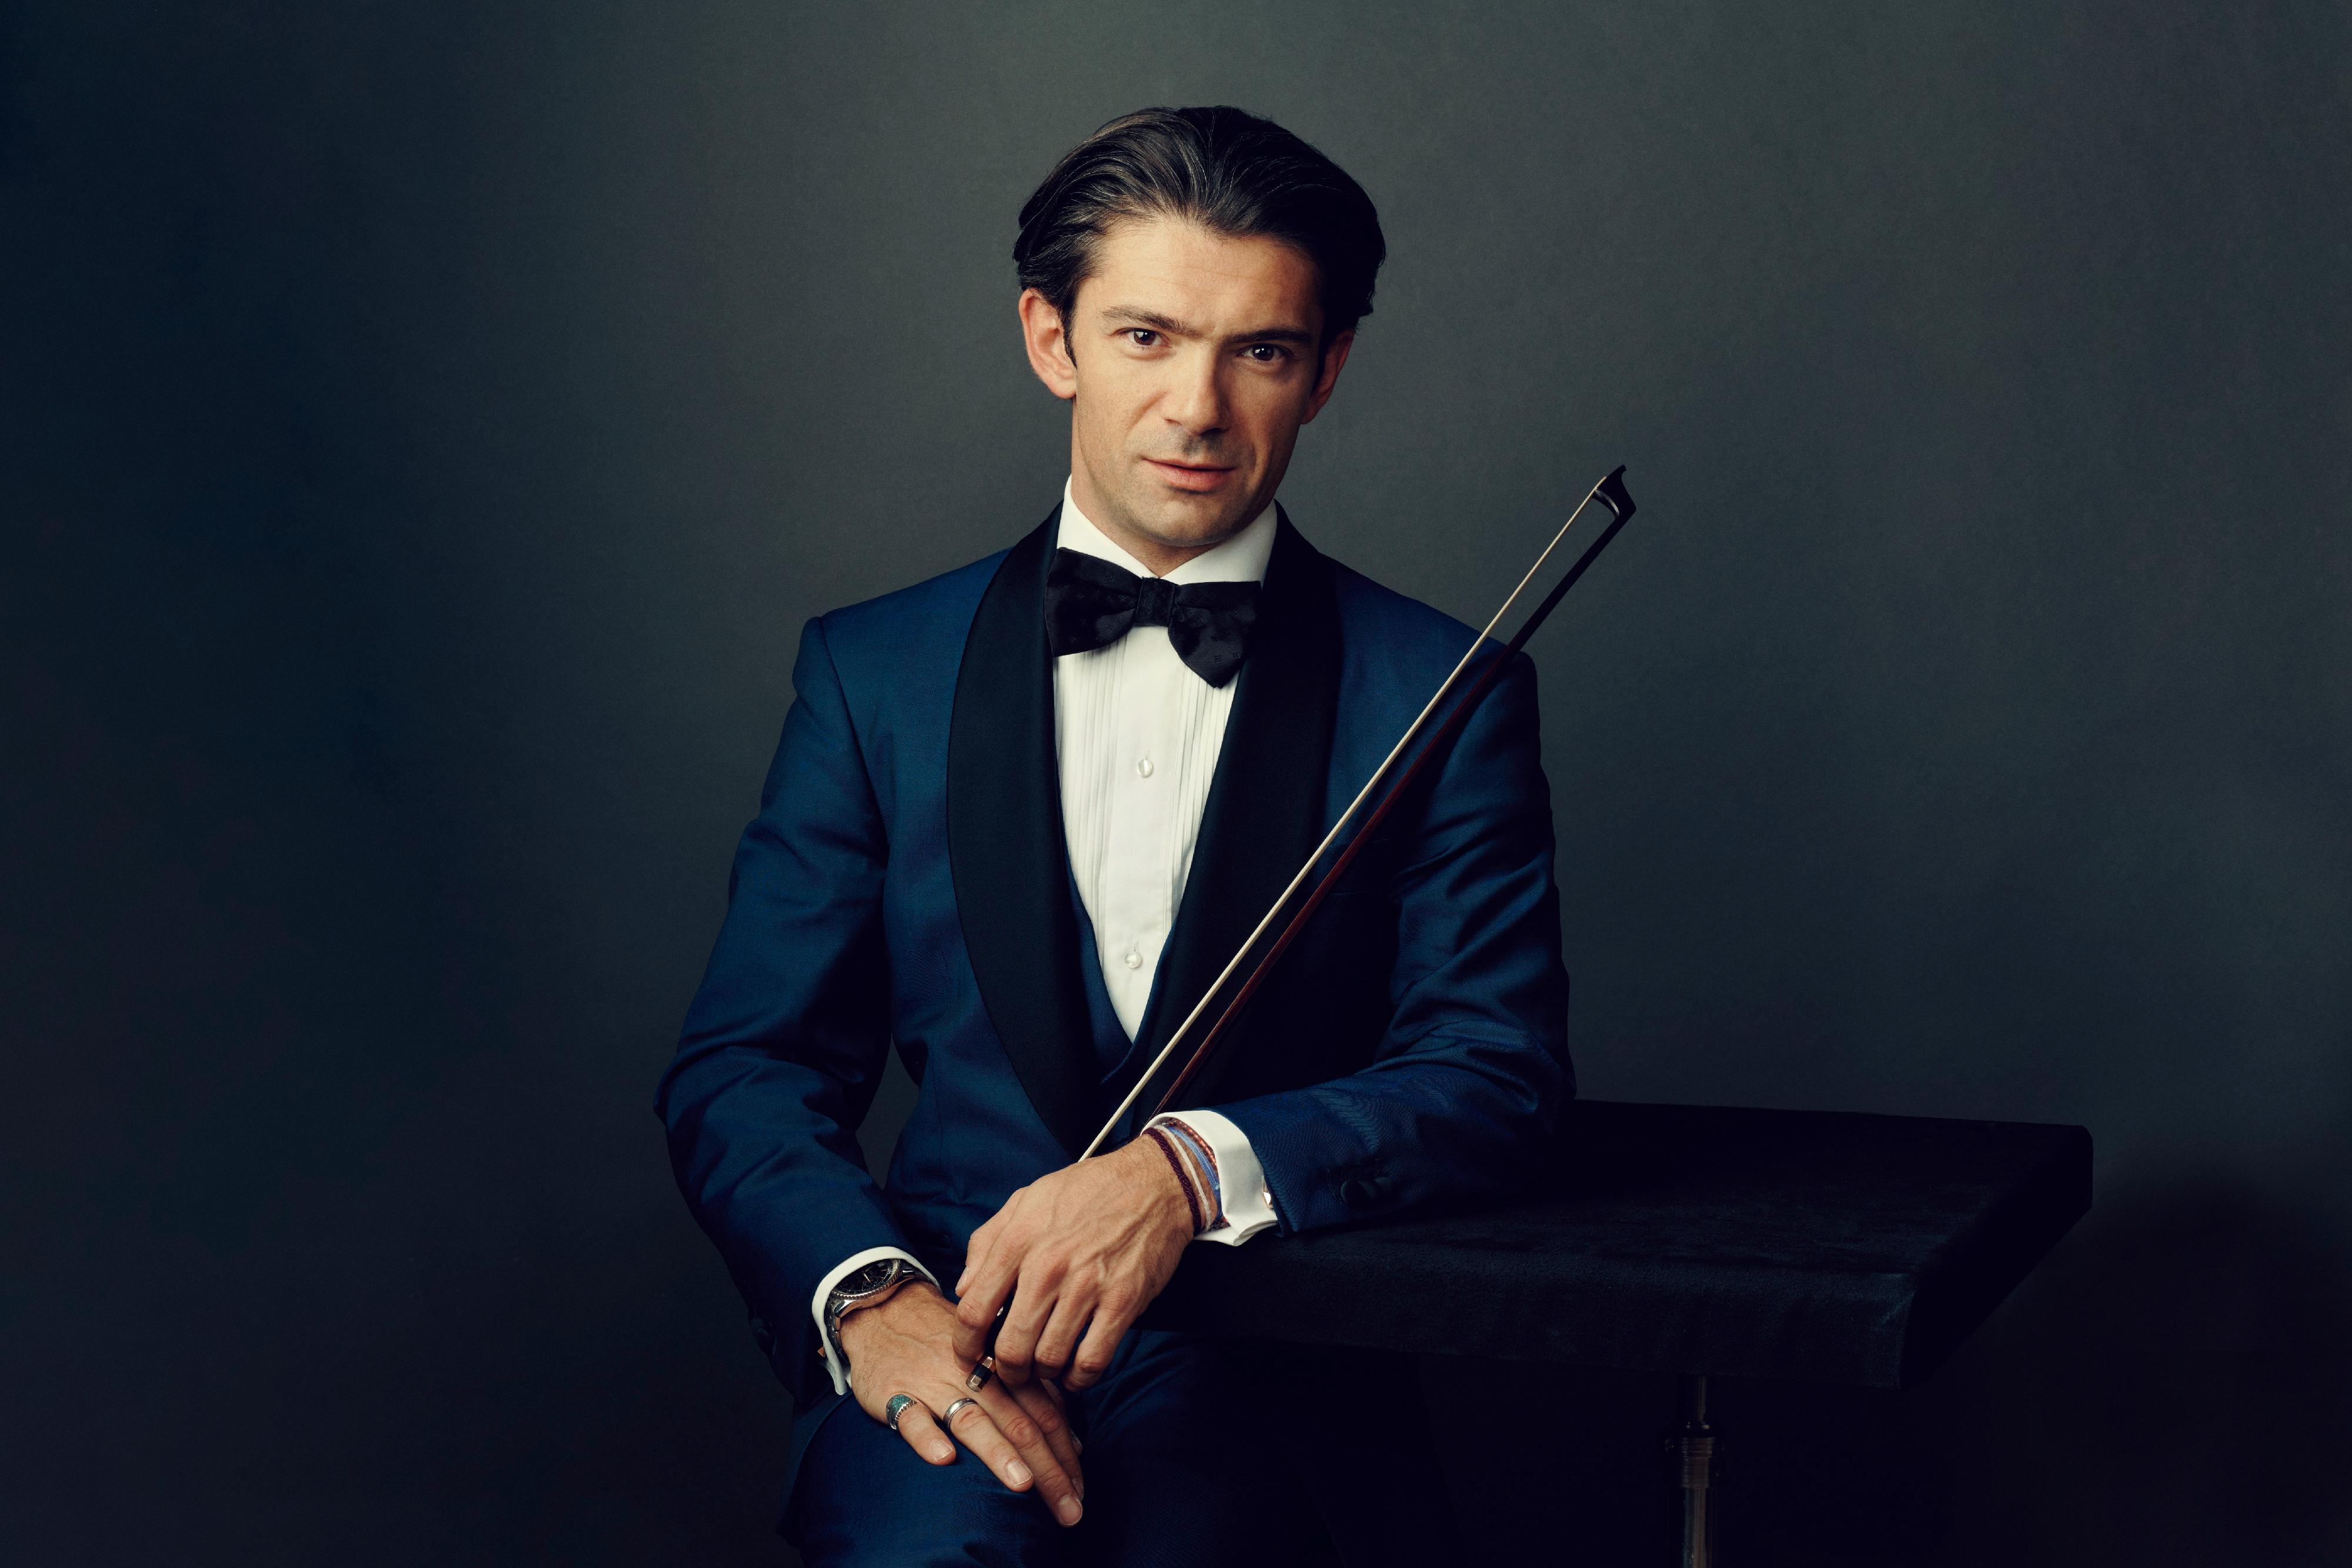 The Leisure and Cultural Services Department will present its Great Music 2024 from May to November. Photo shows cellist Gautier Capuçon. (Photo source: Anoush Abrar)